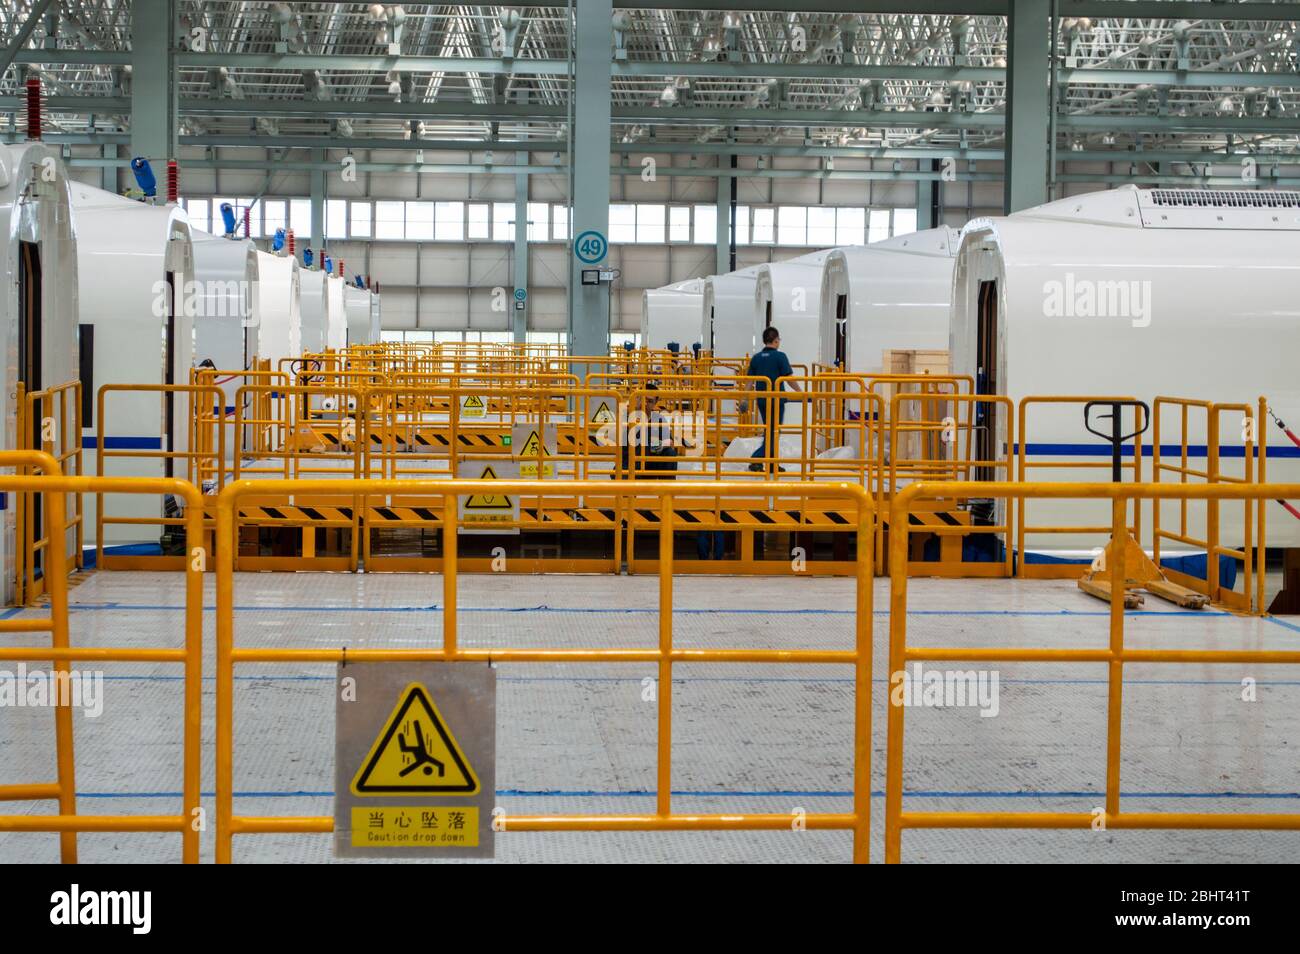 Changchun, Jilin province / China - July 11, 2015: Production hall of CRRC Changchun Railway Vehicles Co. Ltd, leading Chinese manufacturer of high-sp Stock Photo